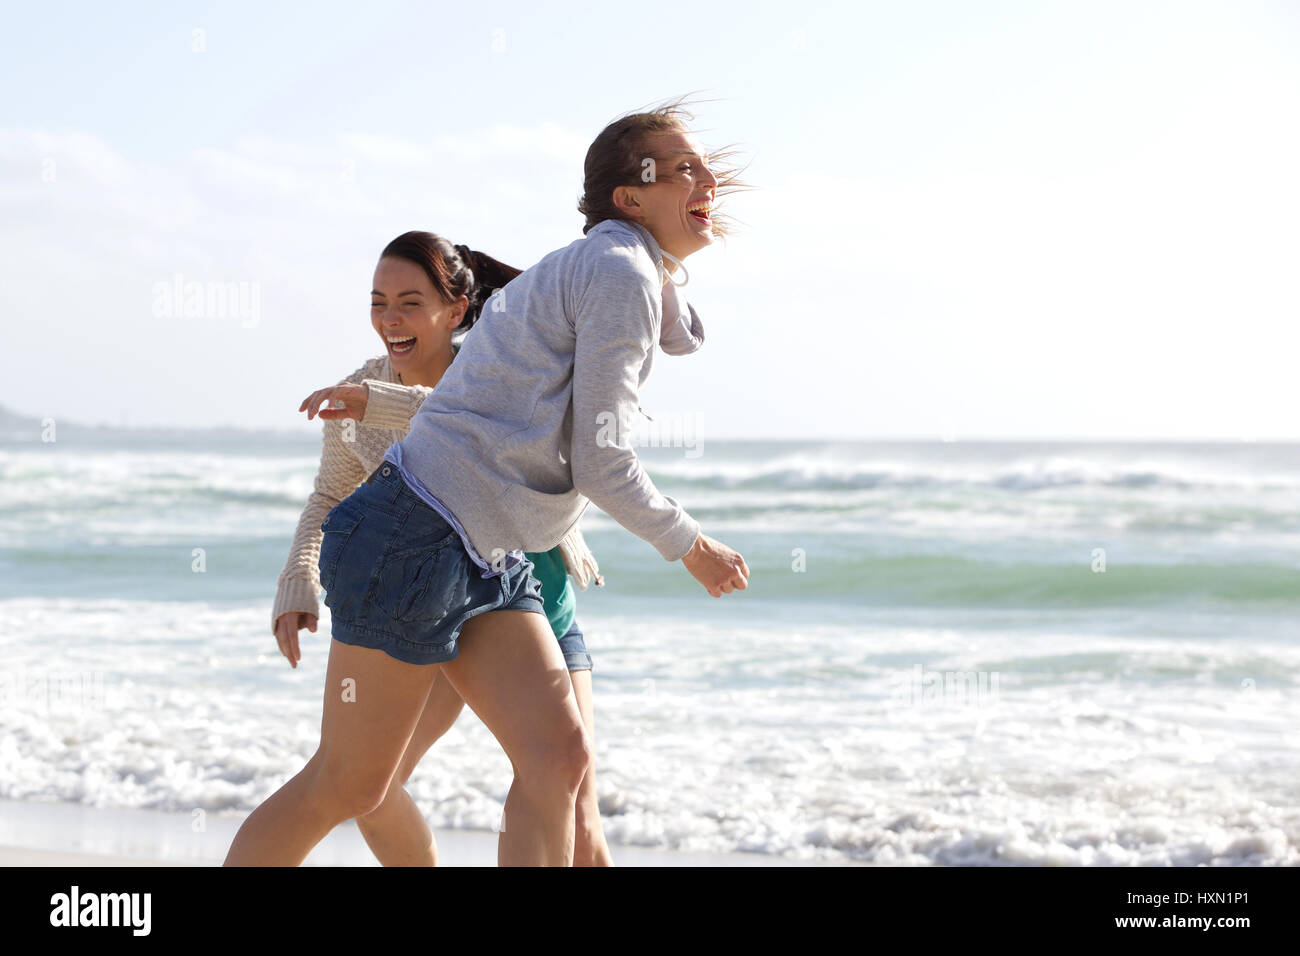 Candid portrait of two women laughing at the beach Stock Photo